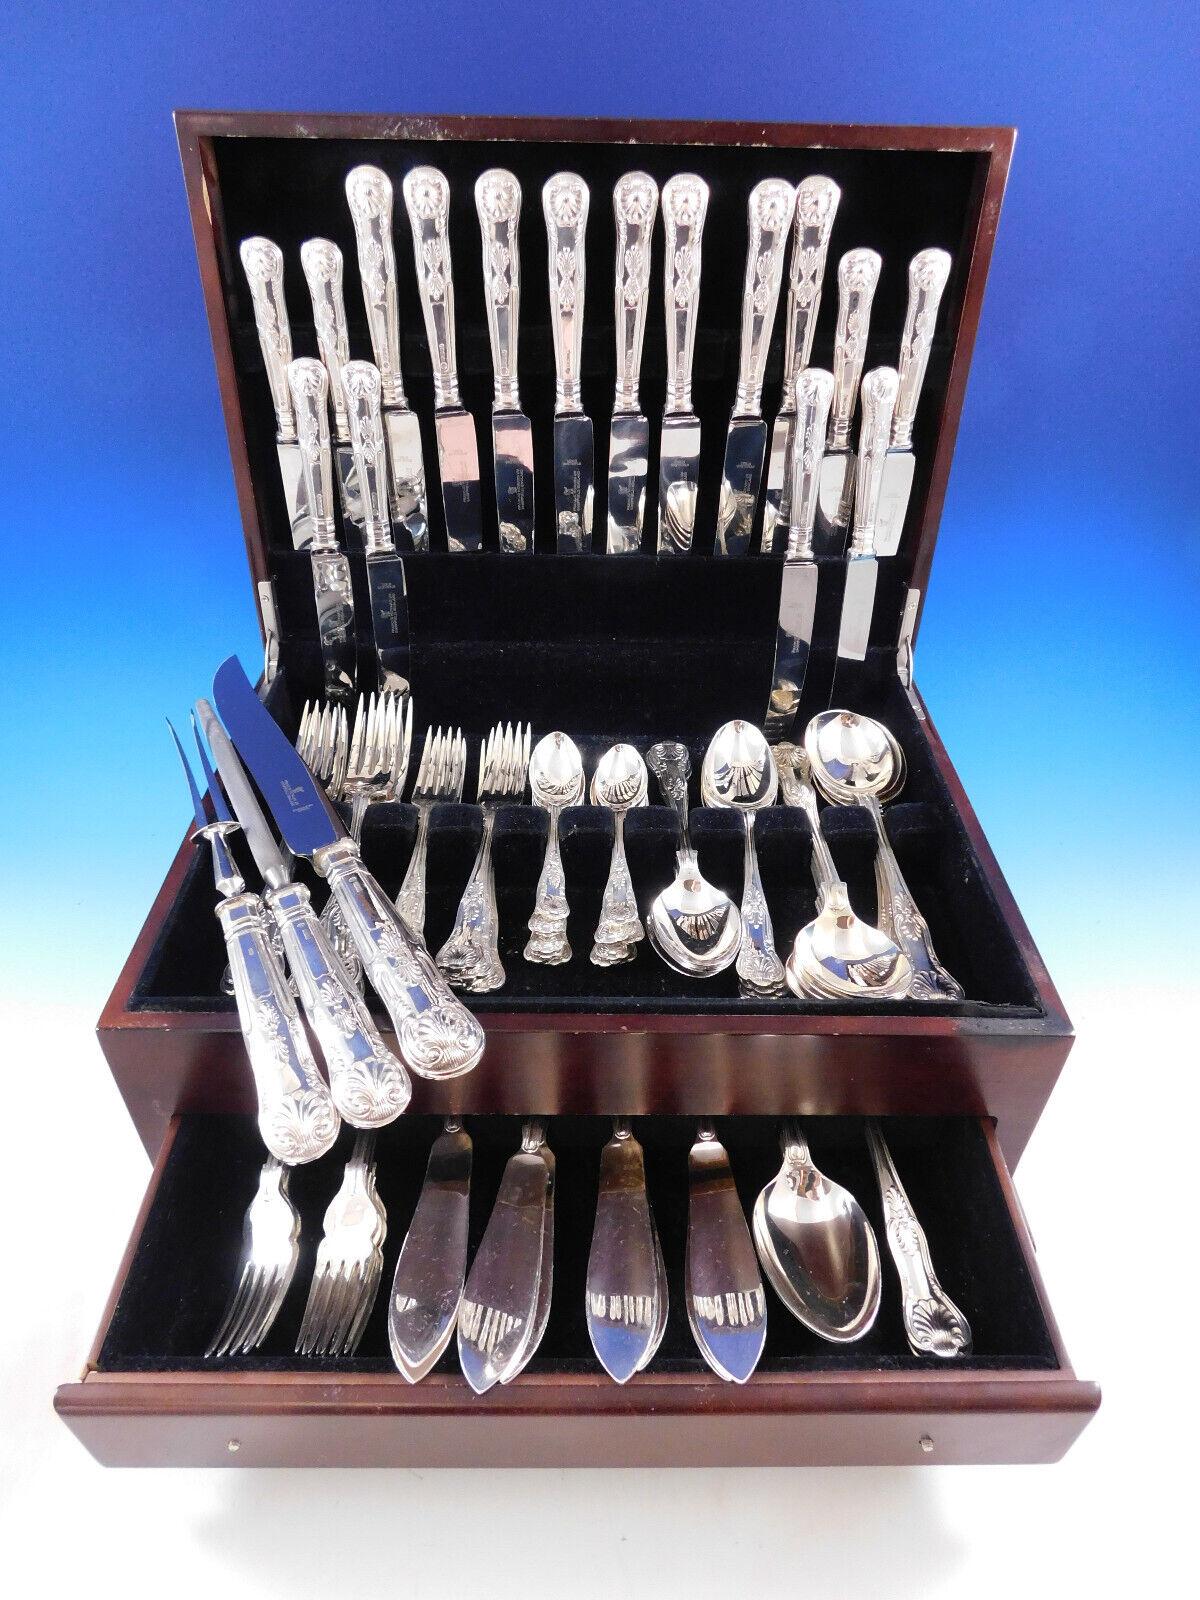 Magnificent Dinner & Luncheon Size Queens by Francis Howard, England, sterling silver cutlery set, 87 pieces. This set includes:

8 Dinner Size Knives, 9 3/4